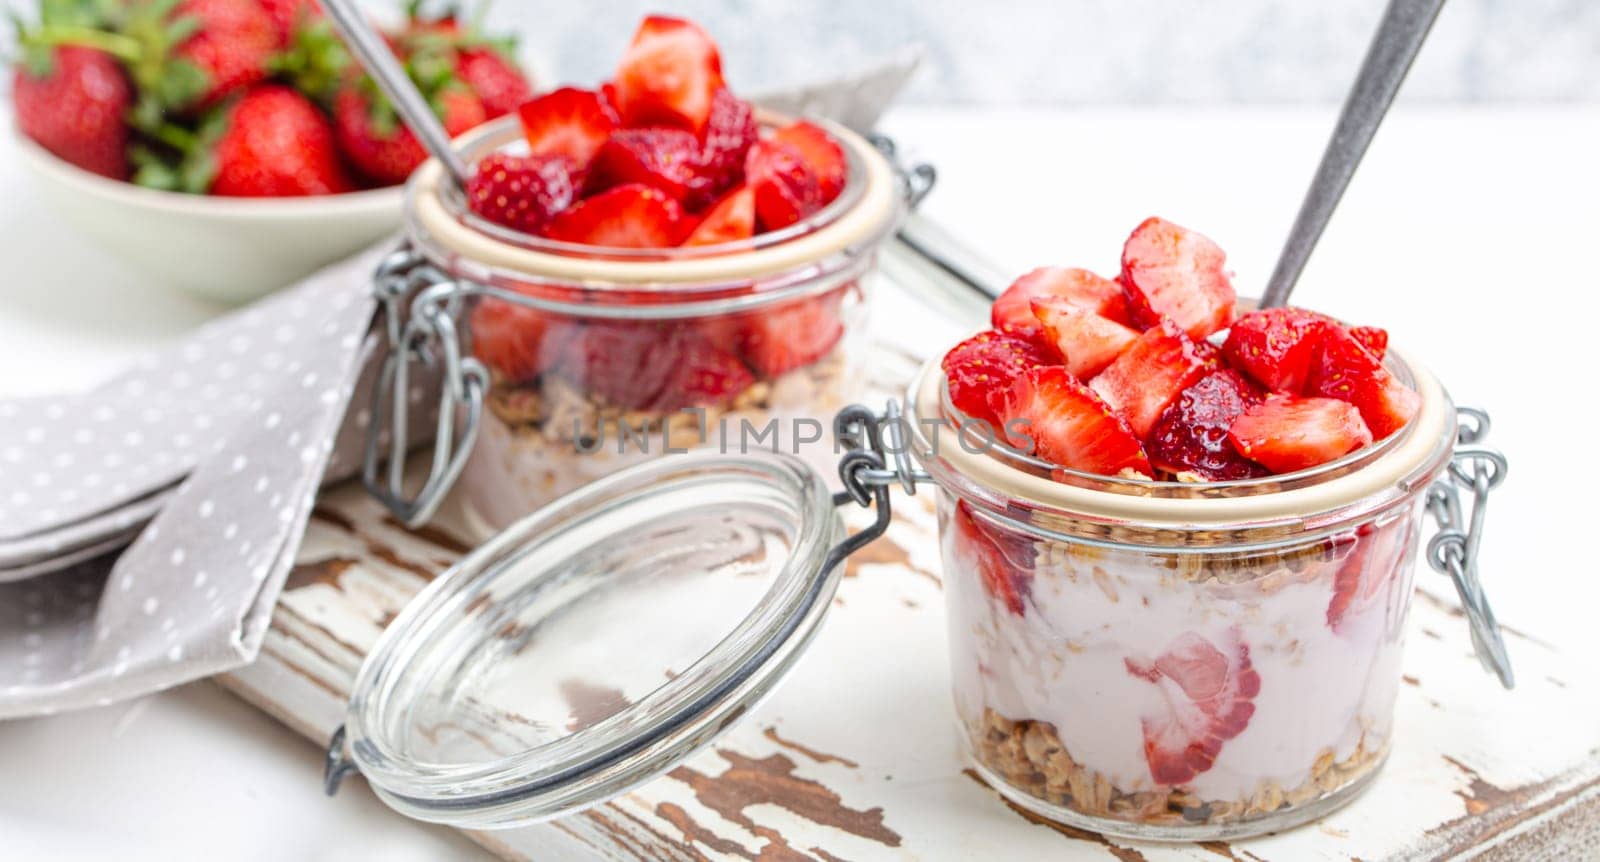 Parfait with Fresh Strawberries, Yoghurt and Crunchy Granola in Transparent Glass Mason Jars on White Rustic Wooden Background Angle View, Healthy Breakfast or Light Summer Fruit Dessert by its_al_dente